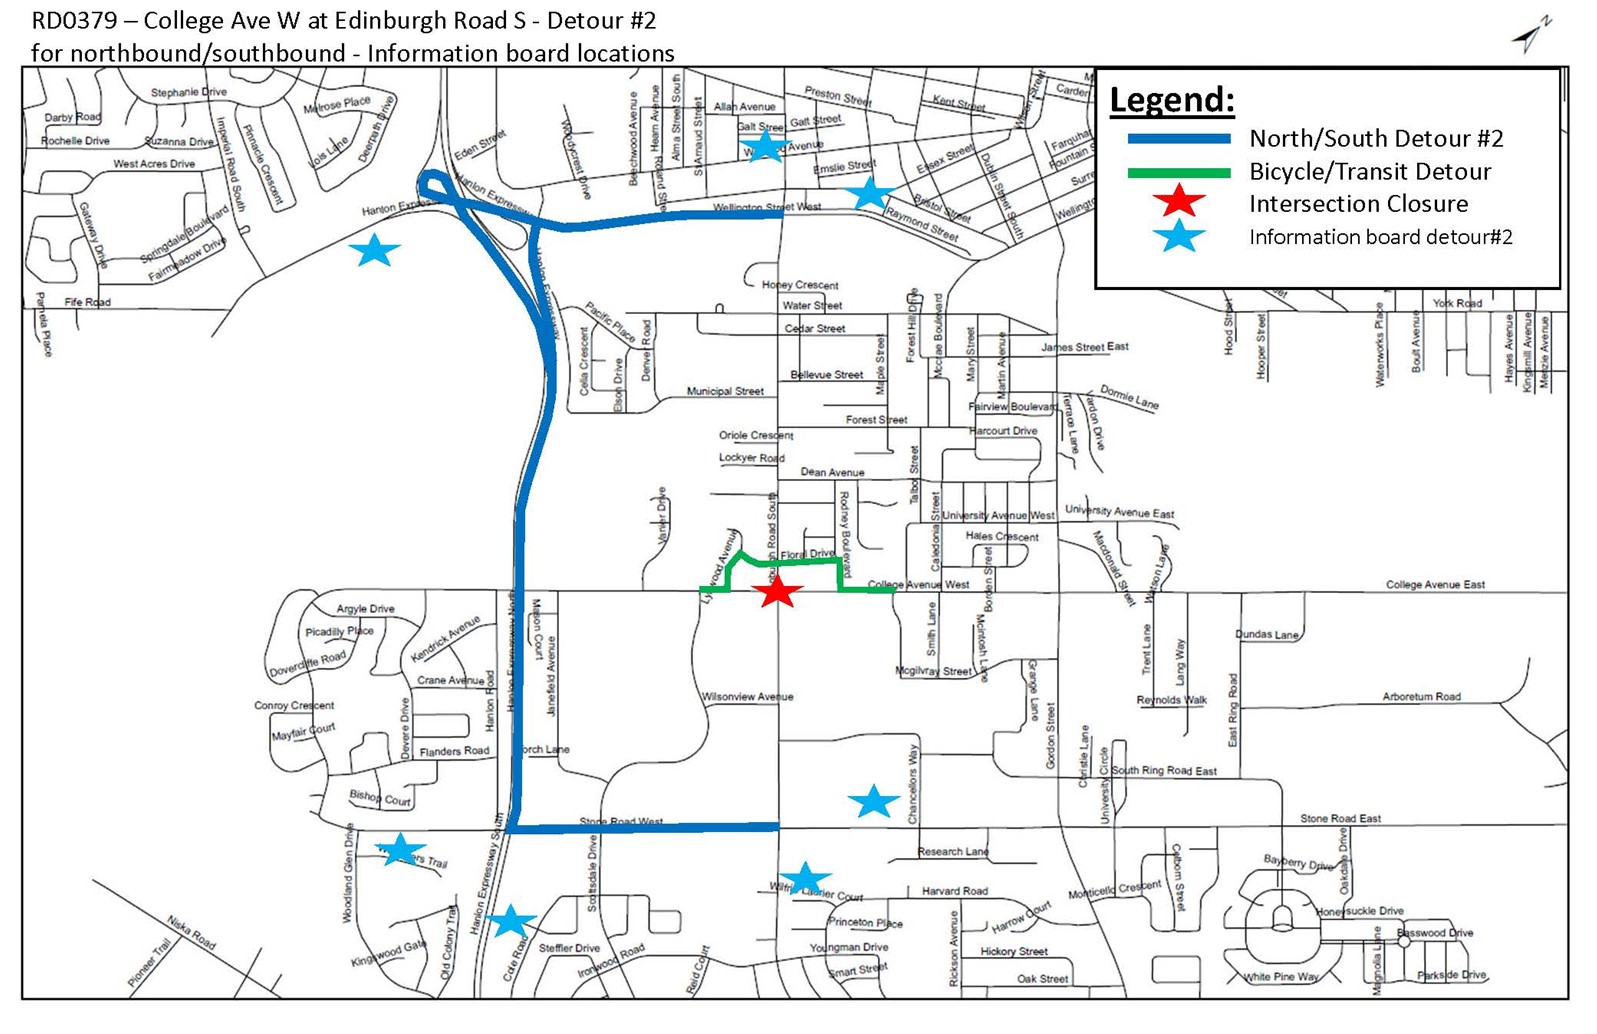 The image depicts detours for pedestrians/bicyclists/transit and vehicles traveling north/south during the closure of the Edinburgh Road South and College Avenue West intersection. Pedestrians/bicyclists heading west on College Avenue West can turn right on Rodney Boulevard, left on Floral Drive, and turn right on Edinburgh Road to continue north. To travel south, continue on Floral Drive across Edinburgh Road South, left on Lynwood Avenue, right on College Avenue West, and south on Scottsdale Drive.  Vehicles traveling north are to turn left on Stone Road West, right on Hanlon Expressway, right on Waterloo Street West, and then left or right on Edinburgh Road. Vehicles traveling south are to turn right on Waterloo Street West, left on Hanlon Expressway, left on Stone Road West, and then left or right on Edinburgh Road. 